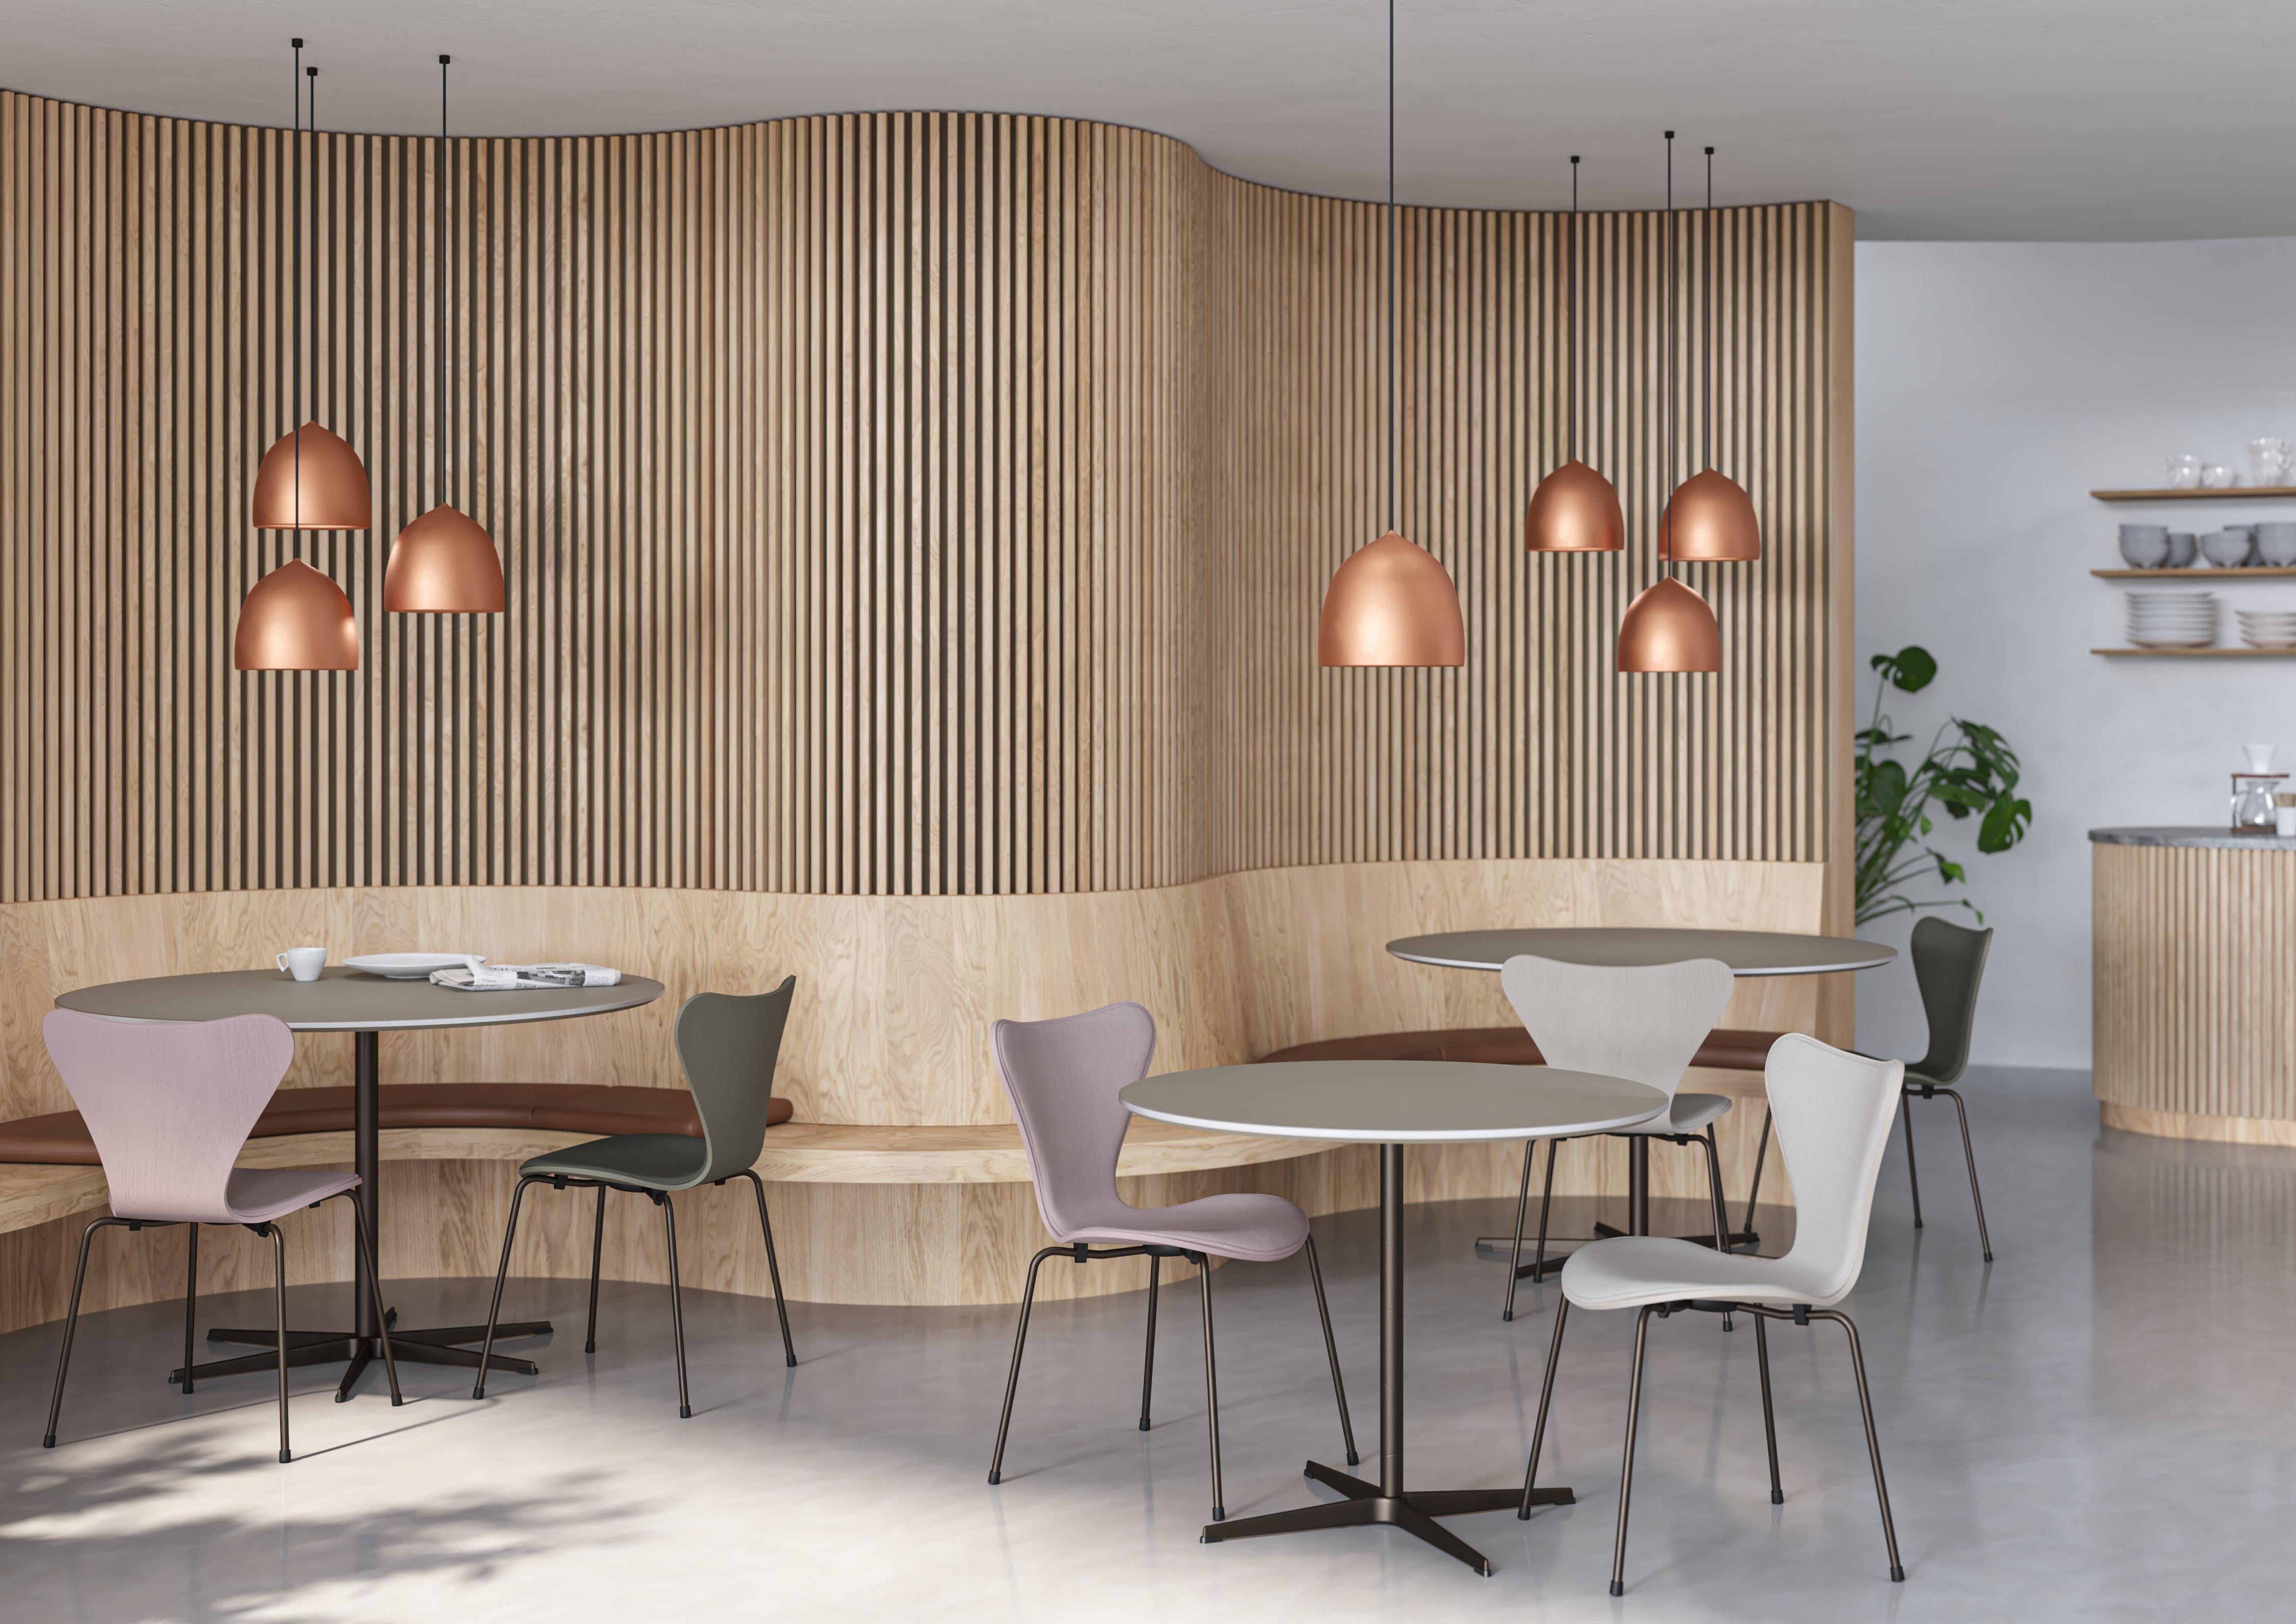 Large GamFratesi 'Suspence P2' Pendant Lamp for Fritz Hansen in Copper.

Established in 1872, Fritz Hansen has become synonymous with legendary Danish design. Combining timeless craftsmanship with an emphasis on sustainability, the brand’s